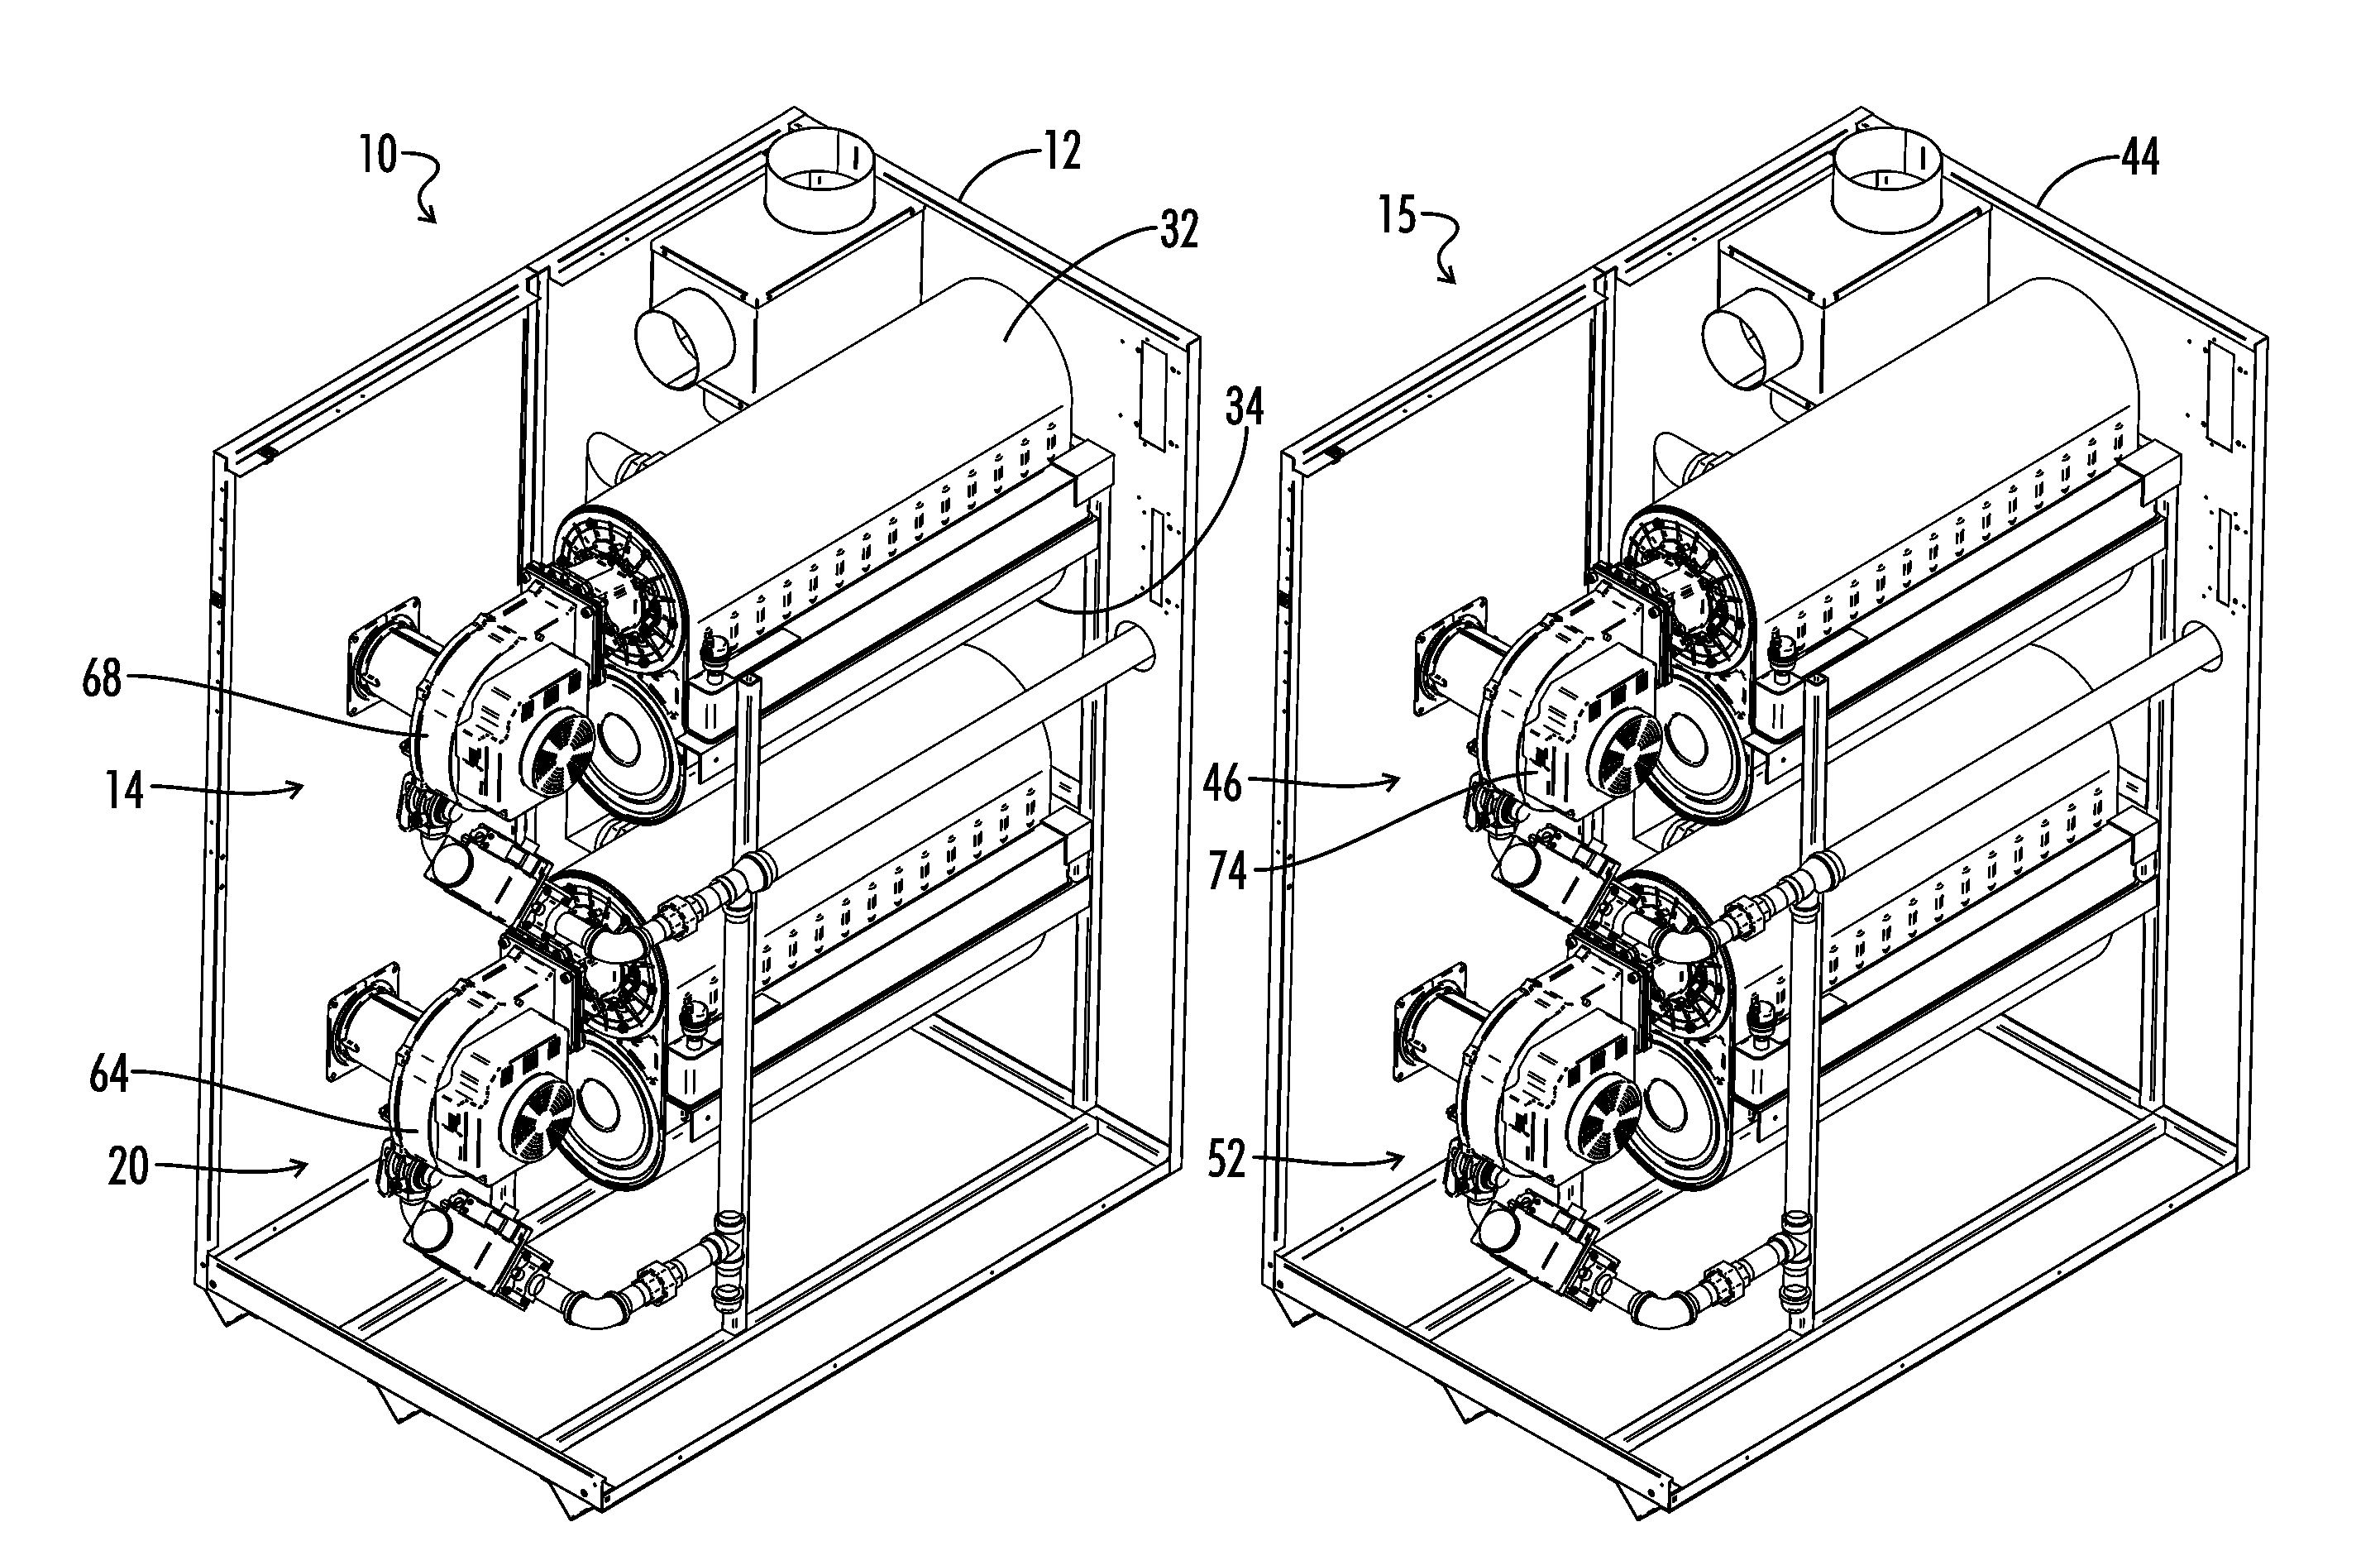 Control system for a boiler assembly